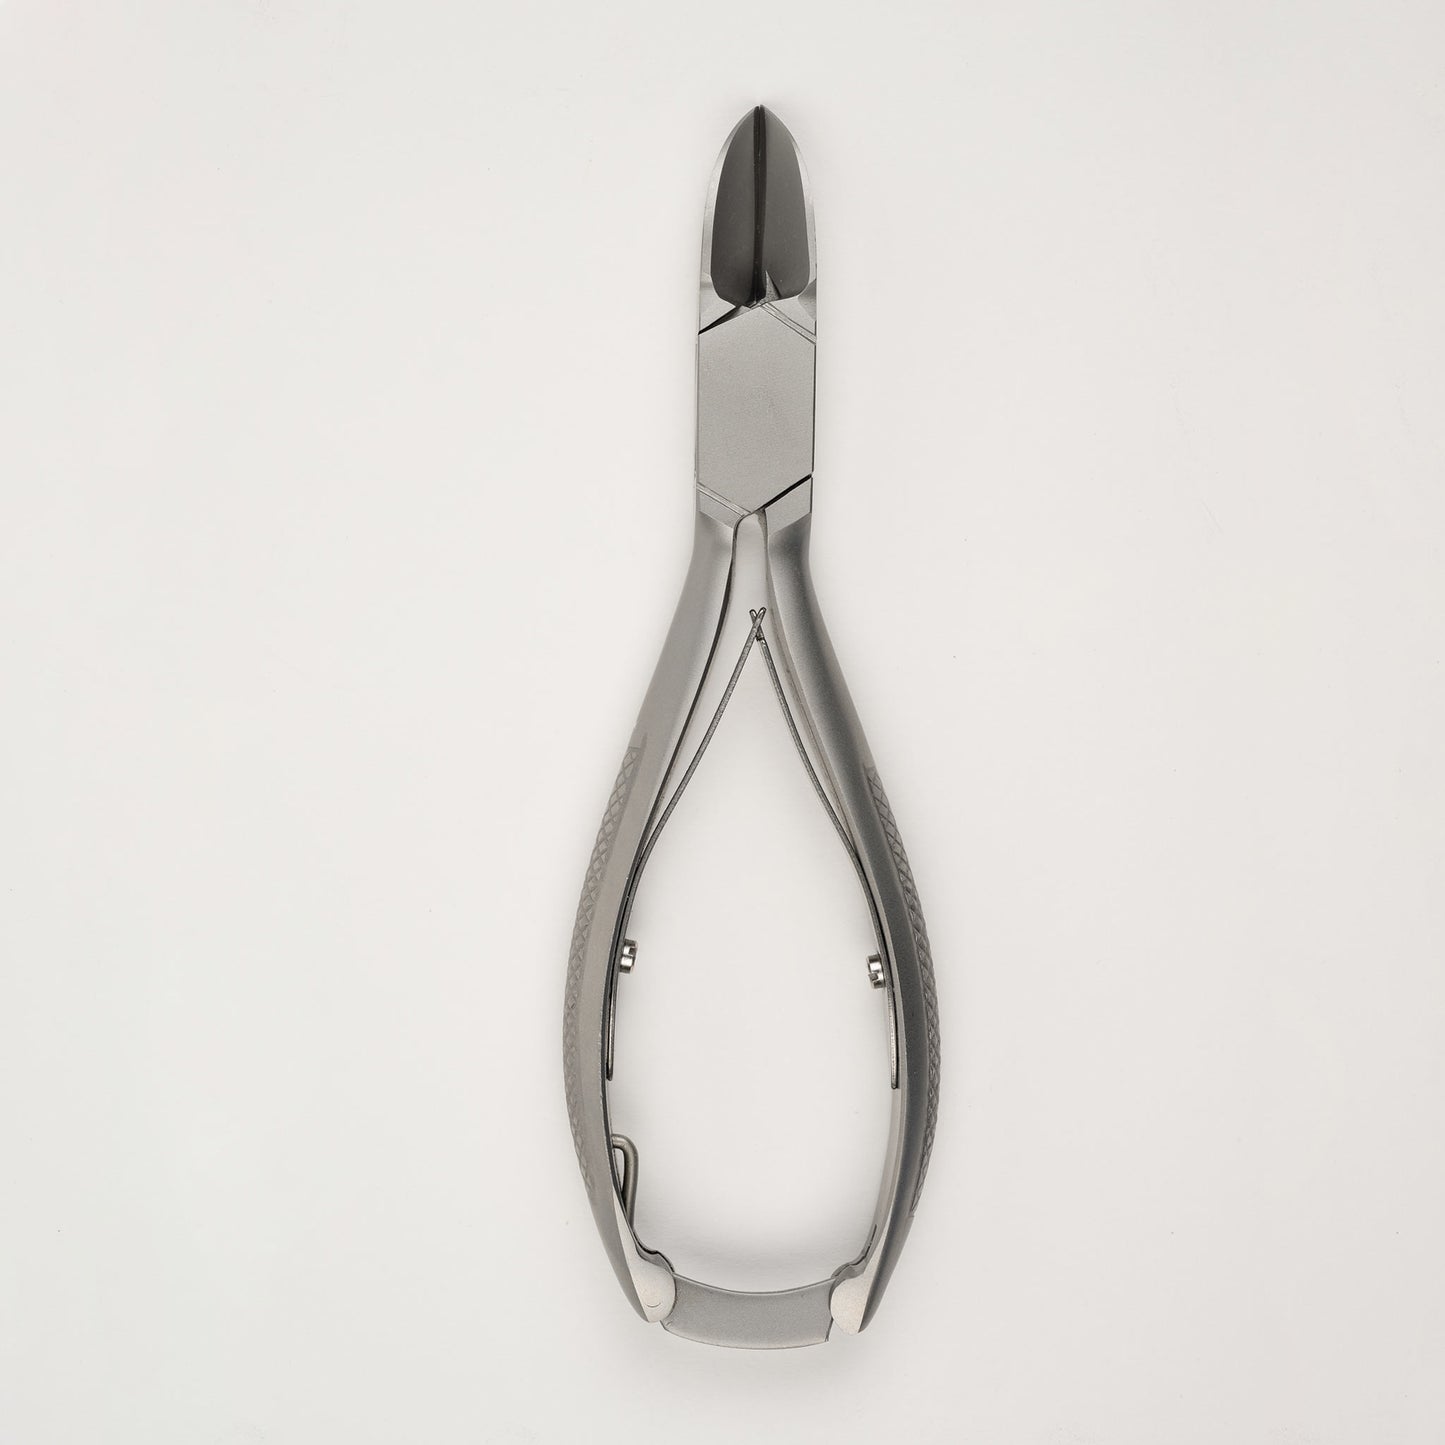 14 cm Podiatry Tough Nail Nippers (23 mm Concave Cut) 7-56RD(C) Closed Overhead View